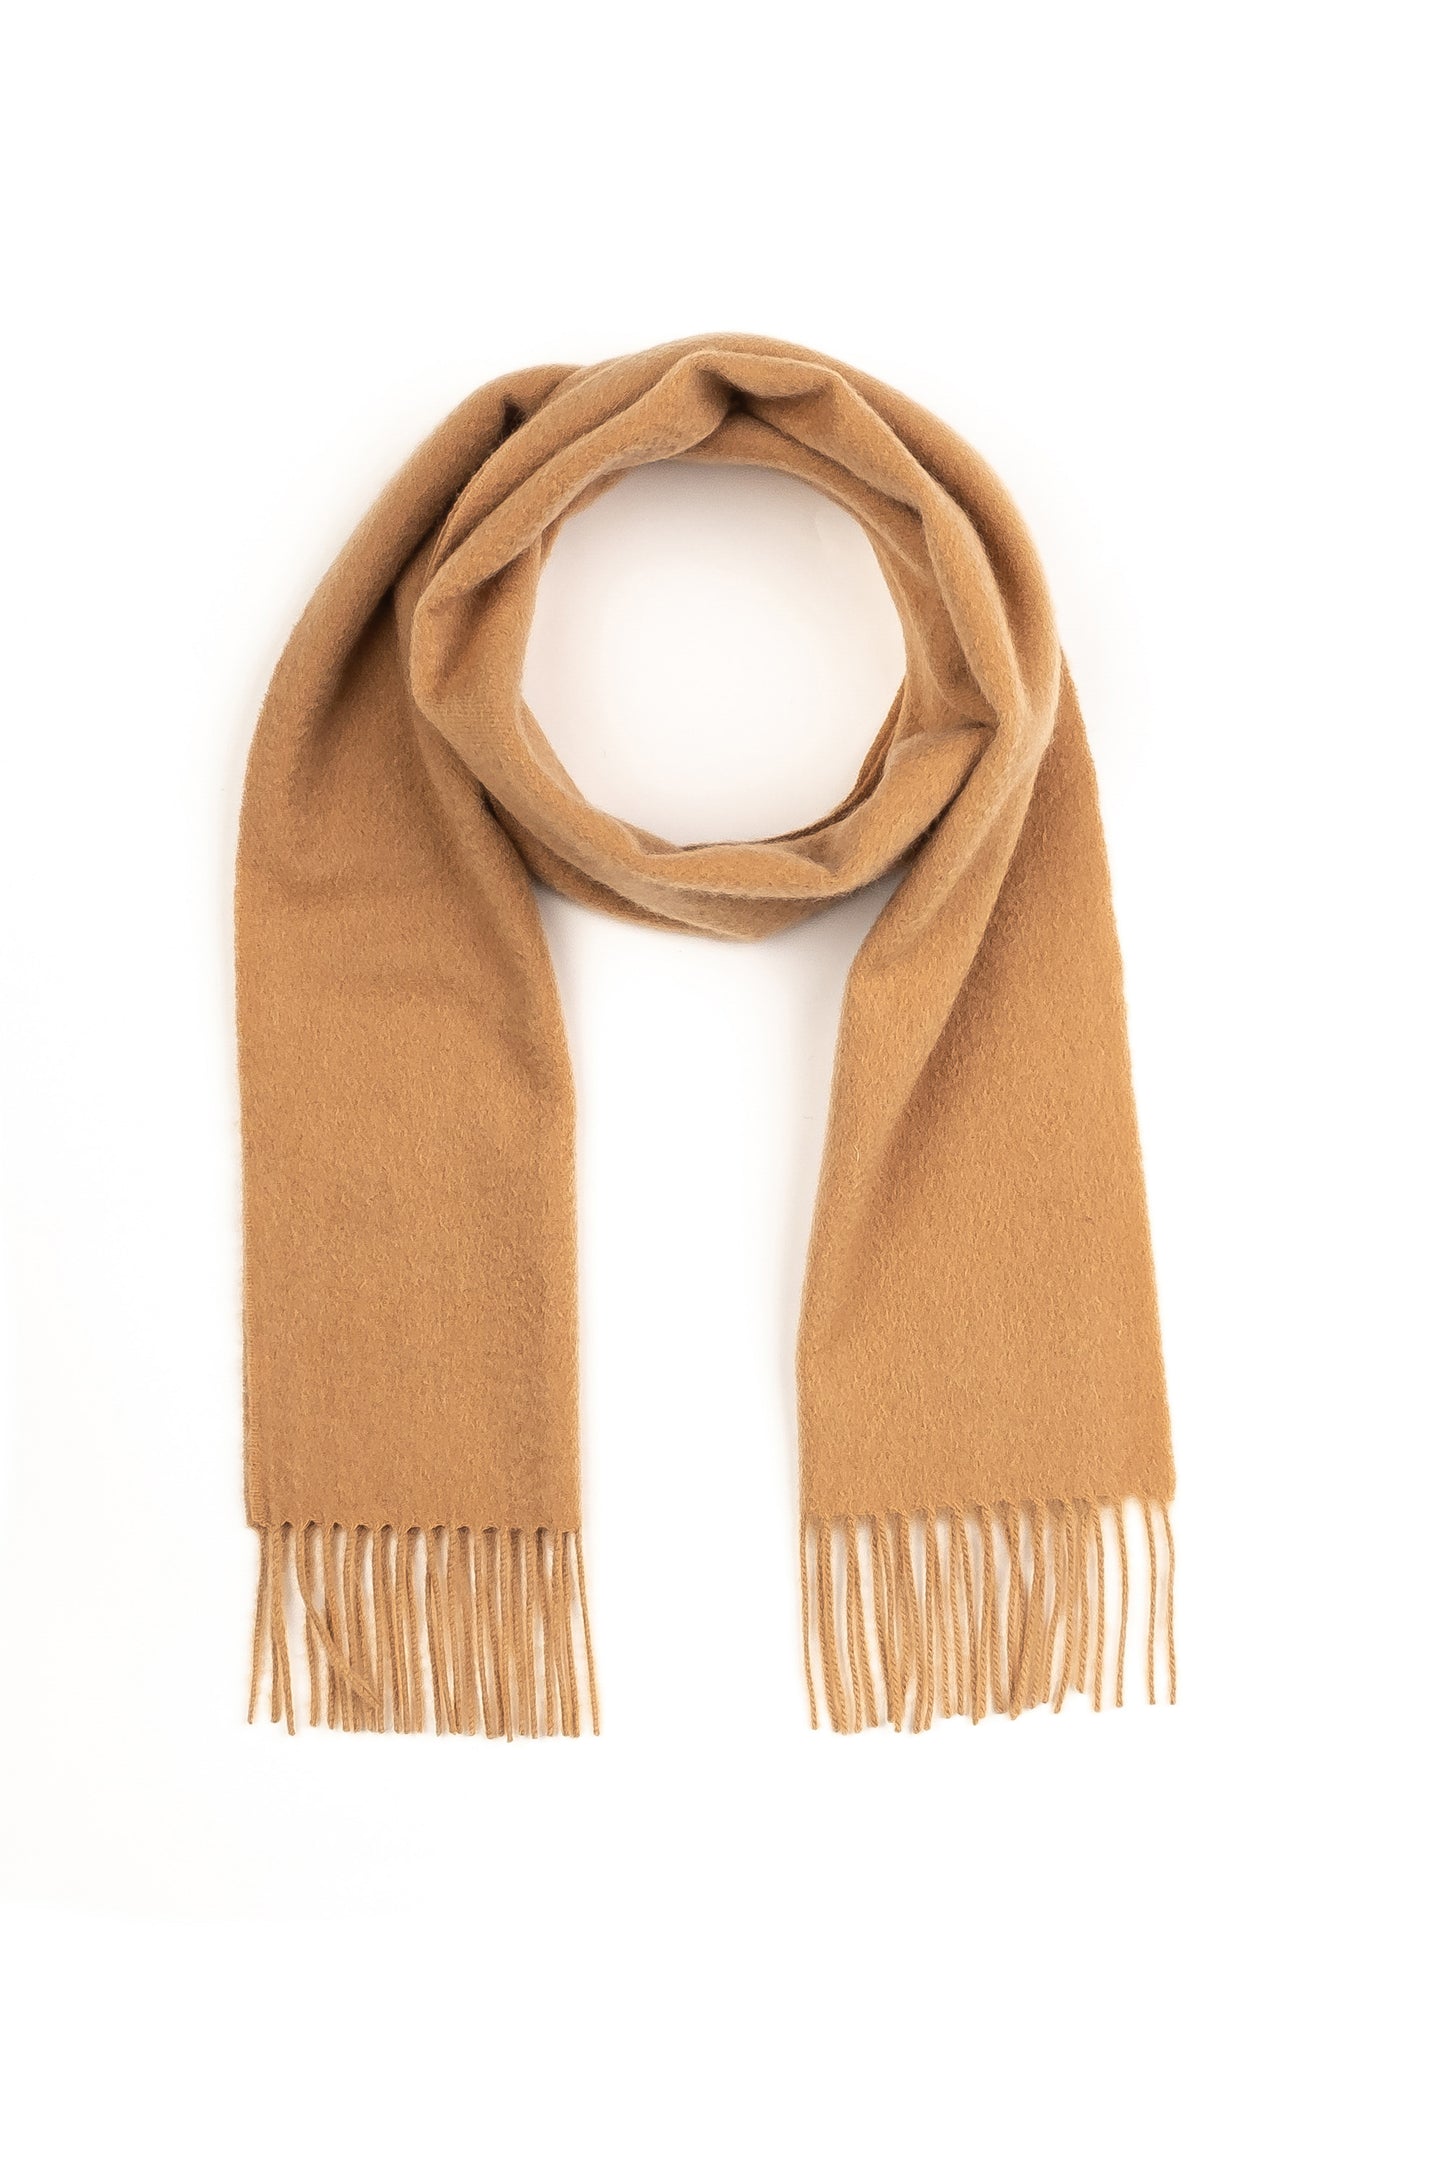 Solid Cashmere Scarf - Warm Camel